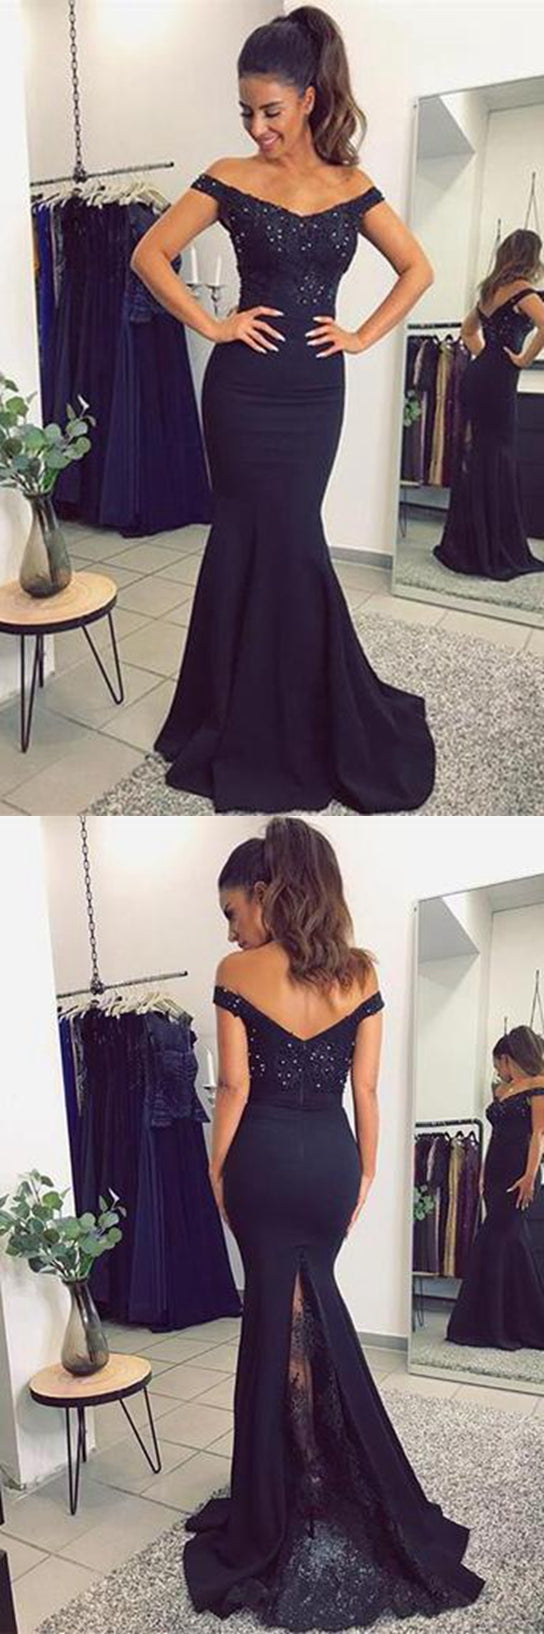 Mermaid Navy Prom Dress, Bridesmaid Dresses, Evening Dress ,Winter Formal Dress, Pageant Dance Dresses, Graduation School Party Gown, PC0180 - Promcoming